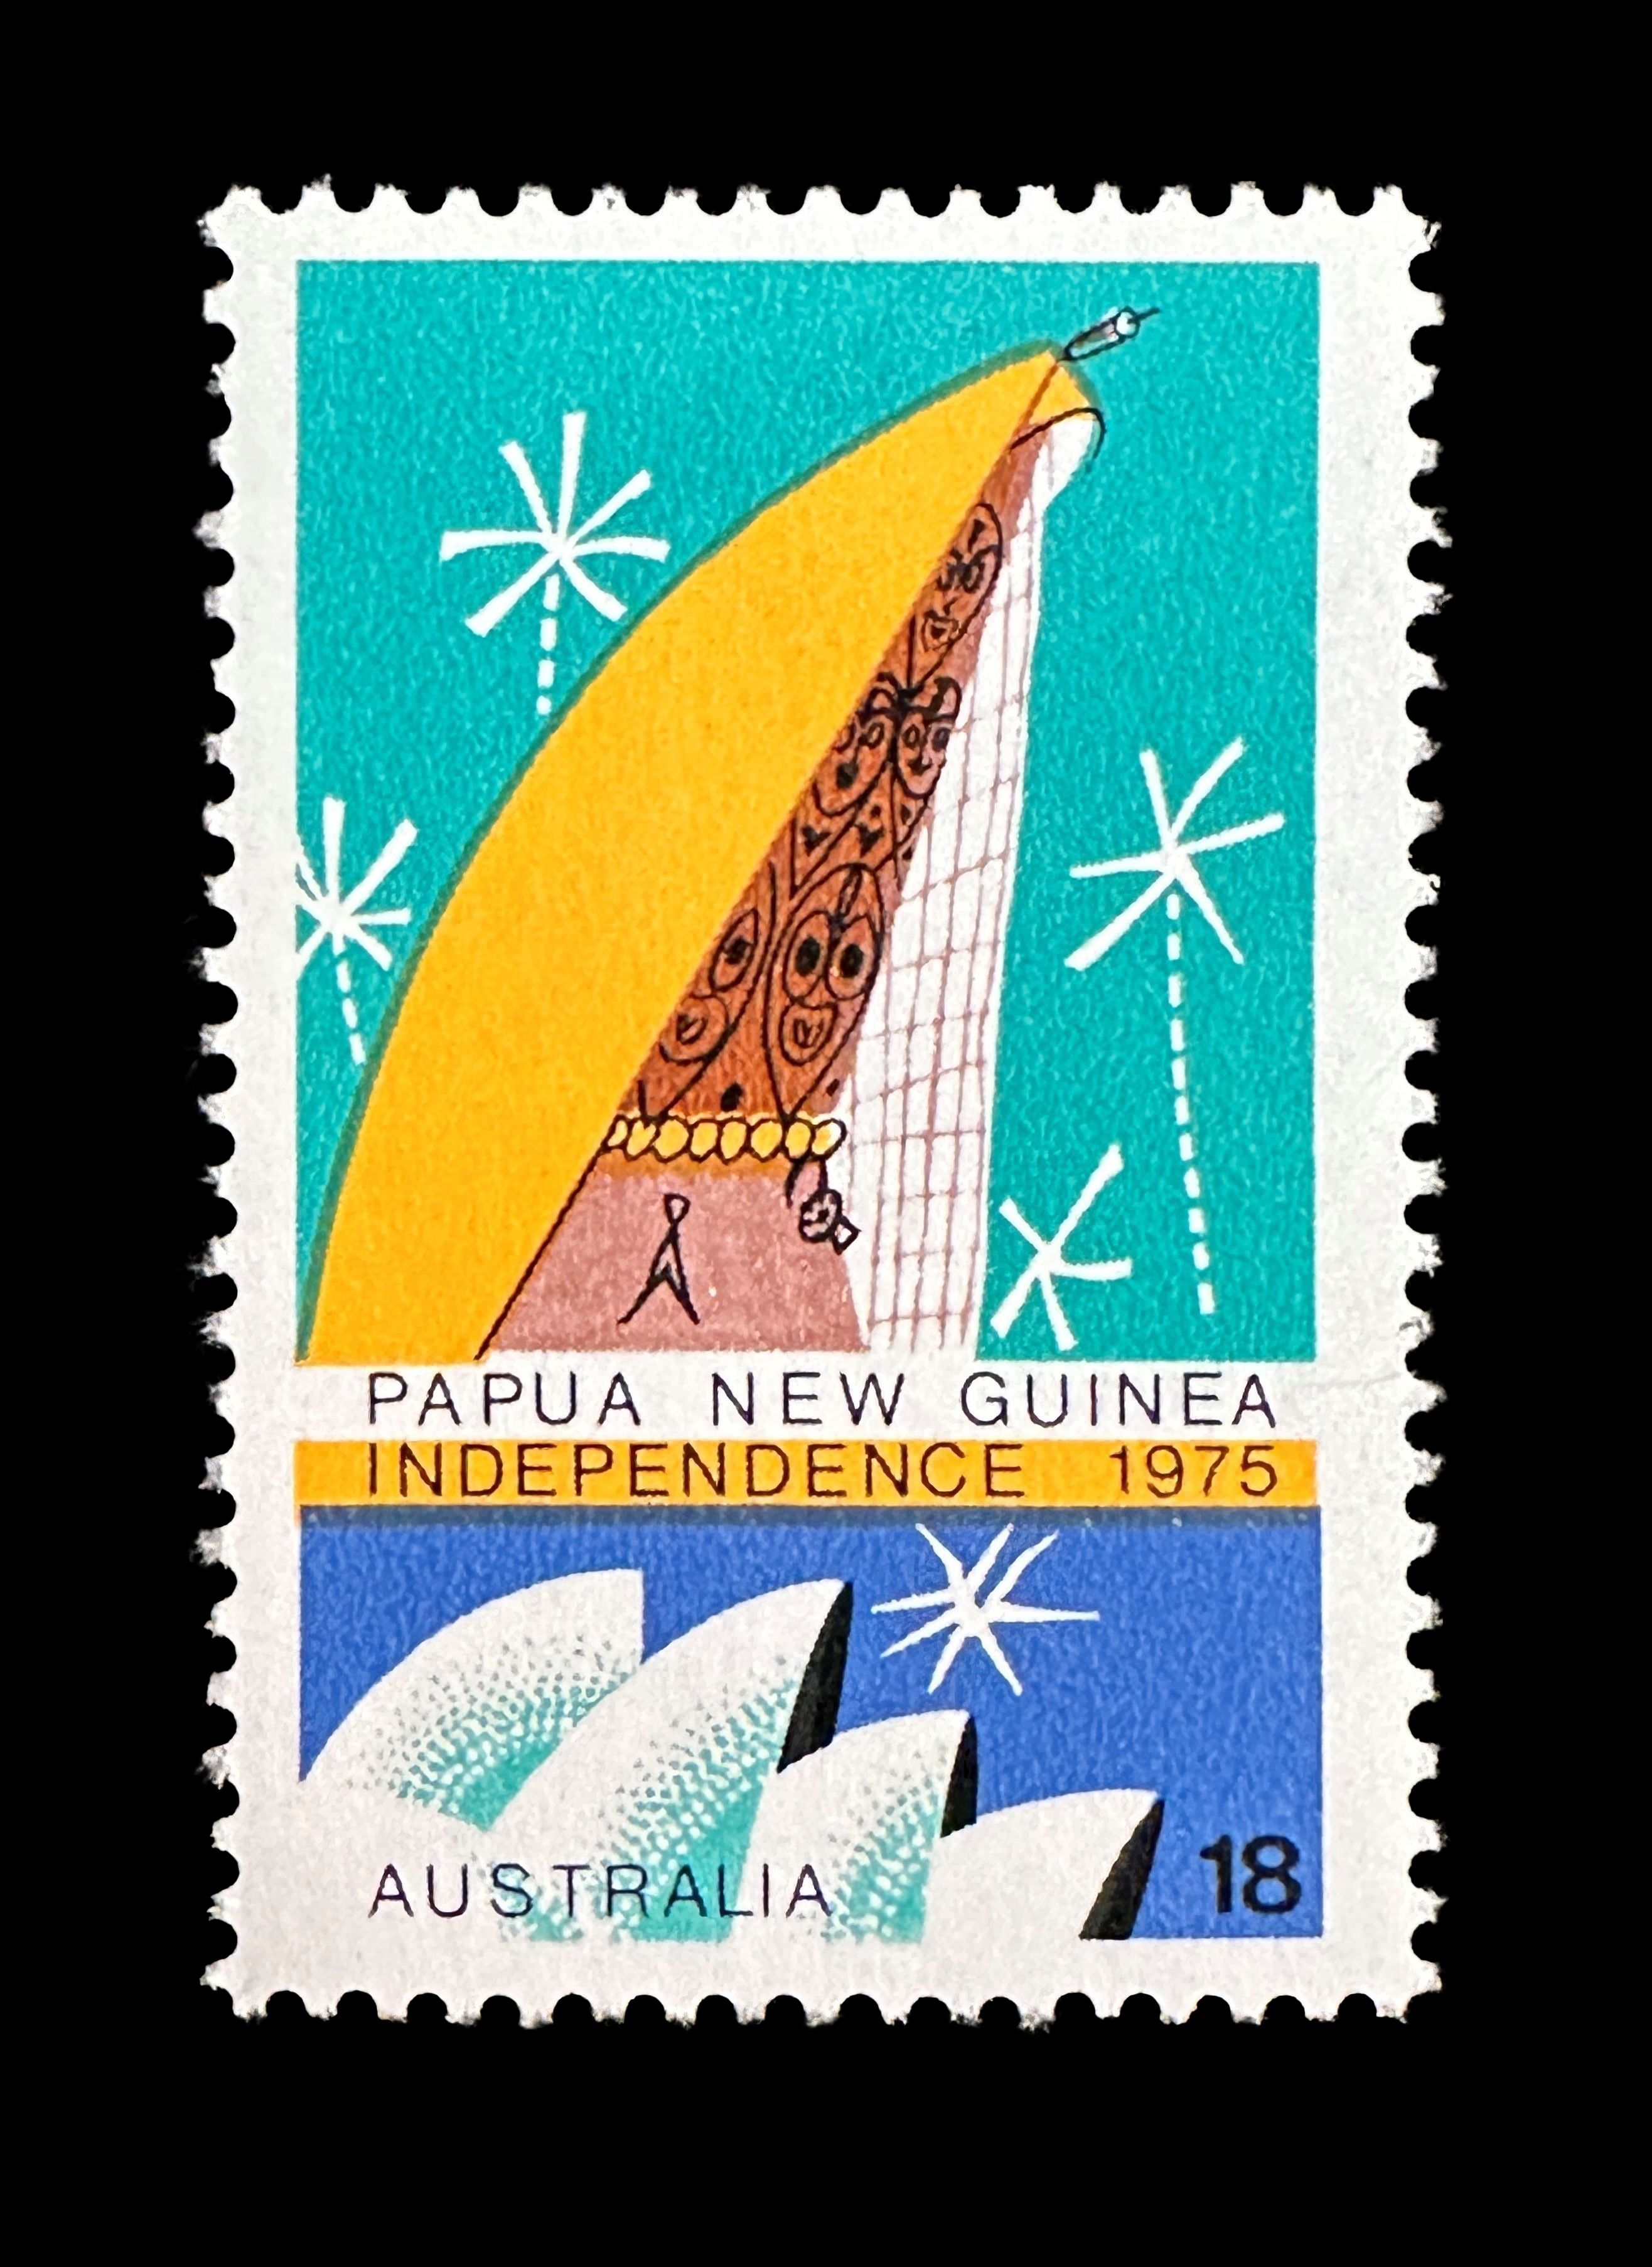 A postage stamp in vertical format with perforations to all sides, the upper section has a green colour and depicts a tall, stylized structure with a curving yellow roof, a central band with the words Papua New Guinea Independence 1975, and below it the stylized roofline of the Sydney Opera House in white on a dark blue background, and the word Australia and number 18.